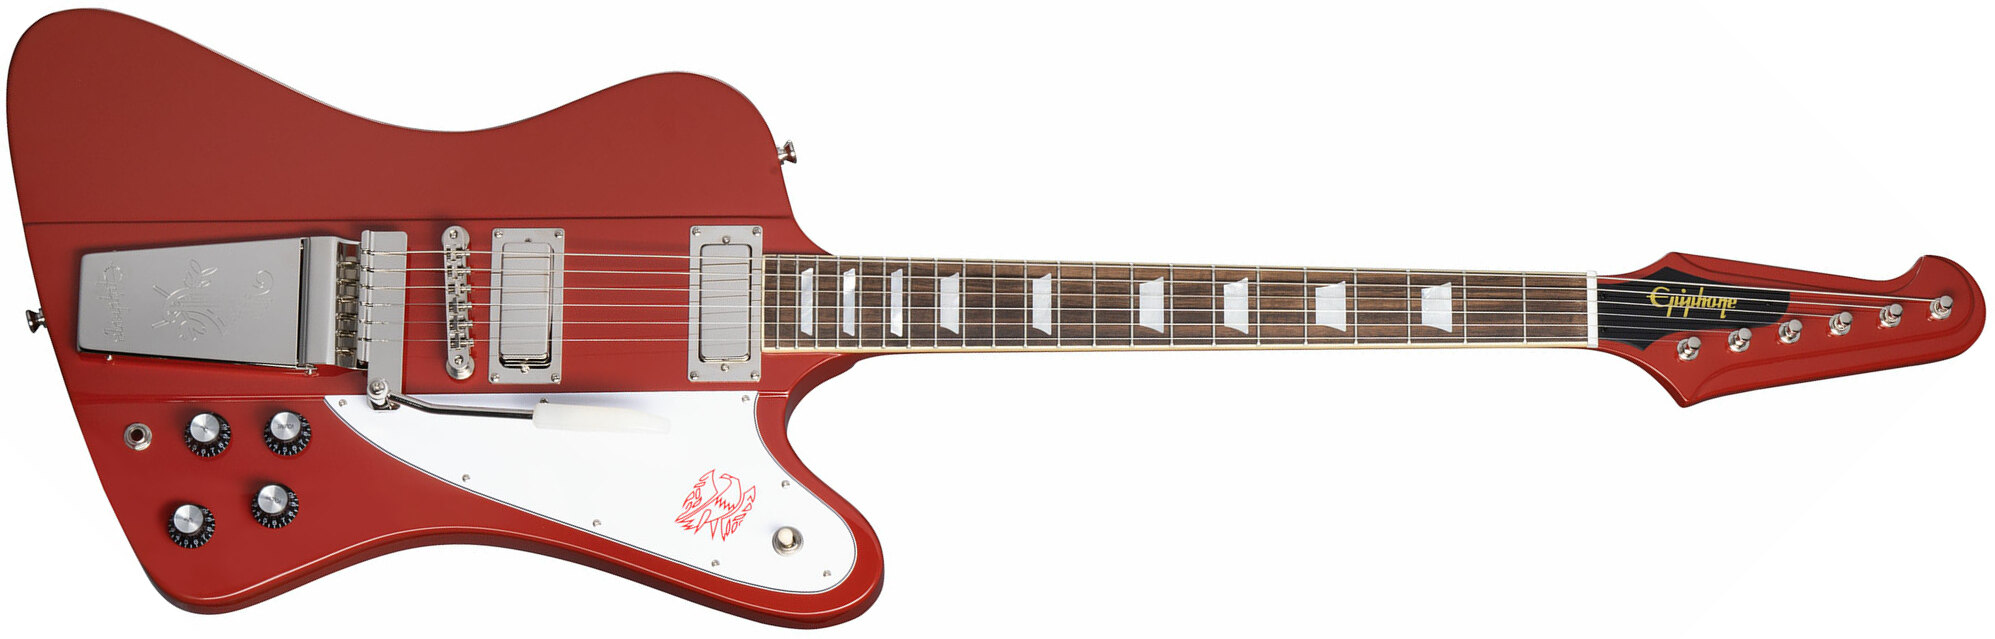 Epiphone Firebird V 1963 Maestro Vibrola Inspired By Gibson Custom 2mh Trem Lau - Ember Red - Guitarra electrica retro rock - Main picture